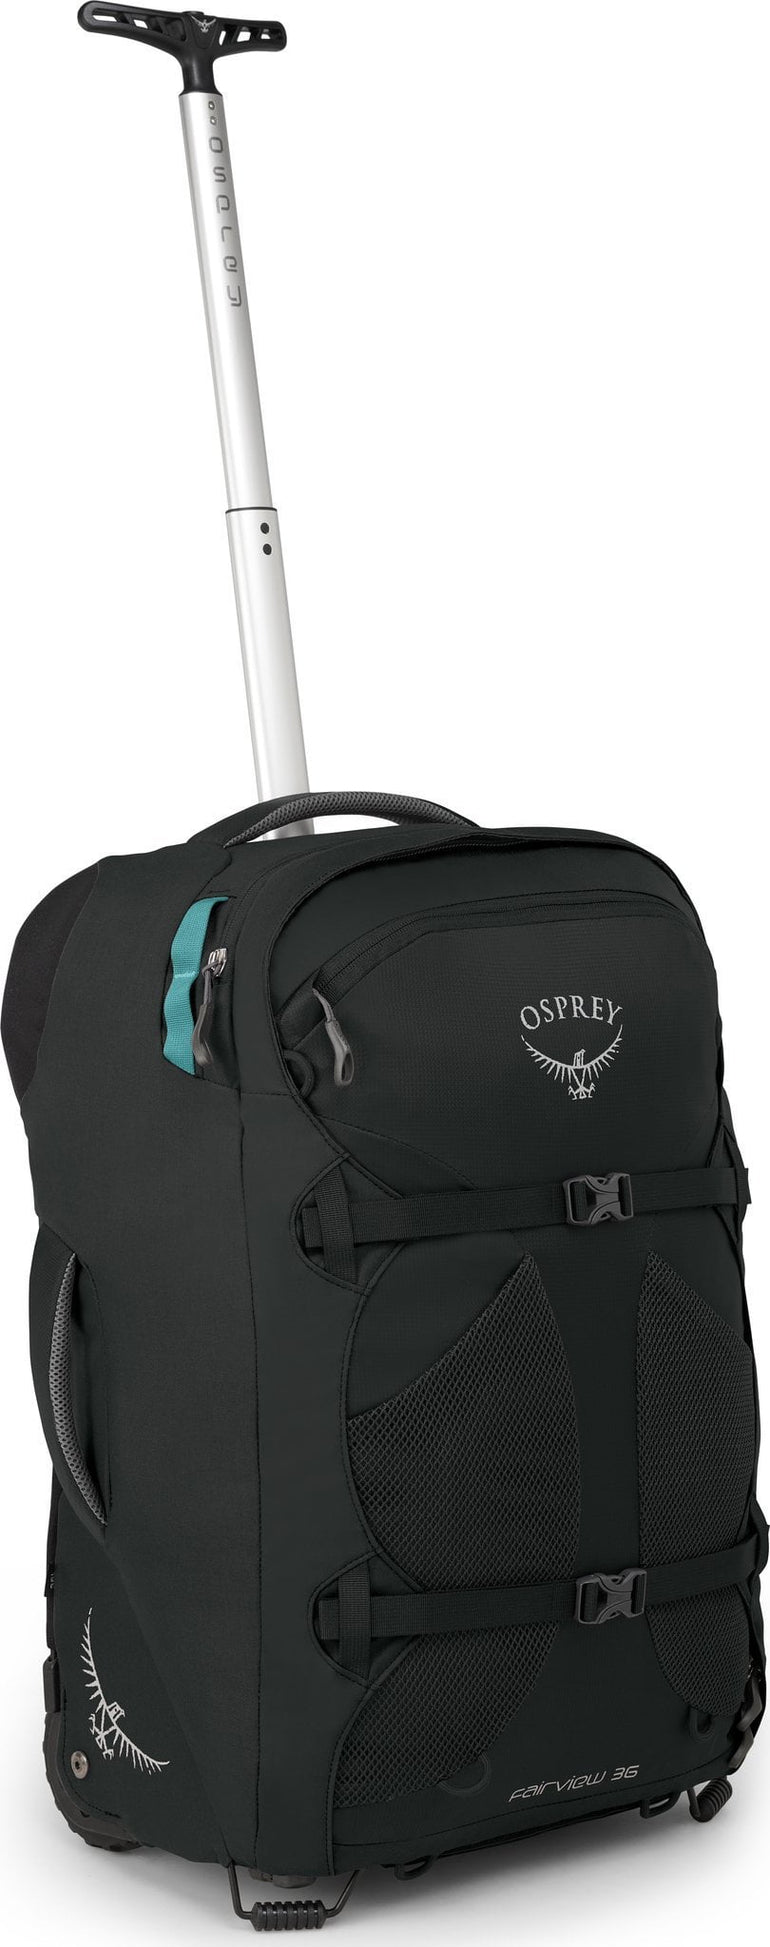 Osprey Fairview Wheeled Travel Pack Carry-On 36 - Women's - BlackOsprey Fairview Wheeled Travel Pack Carry-On 36 - Women's